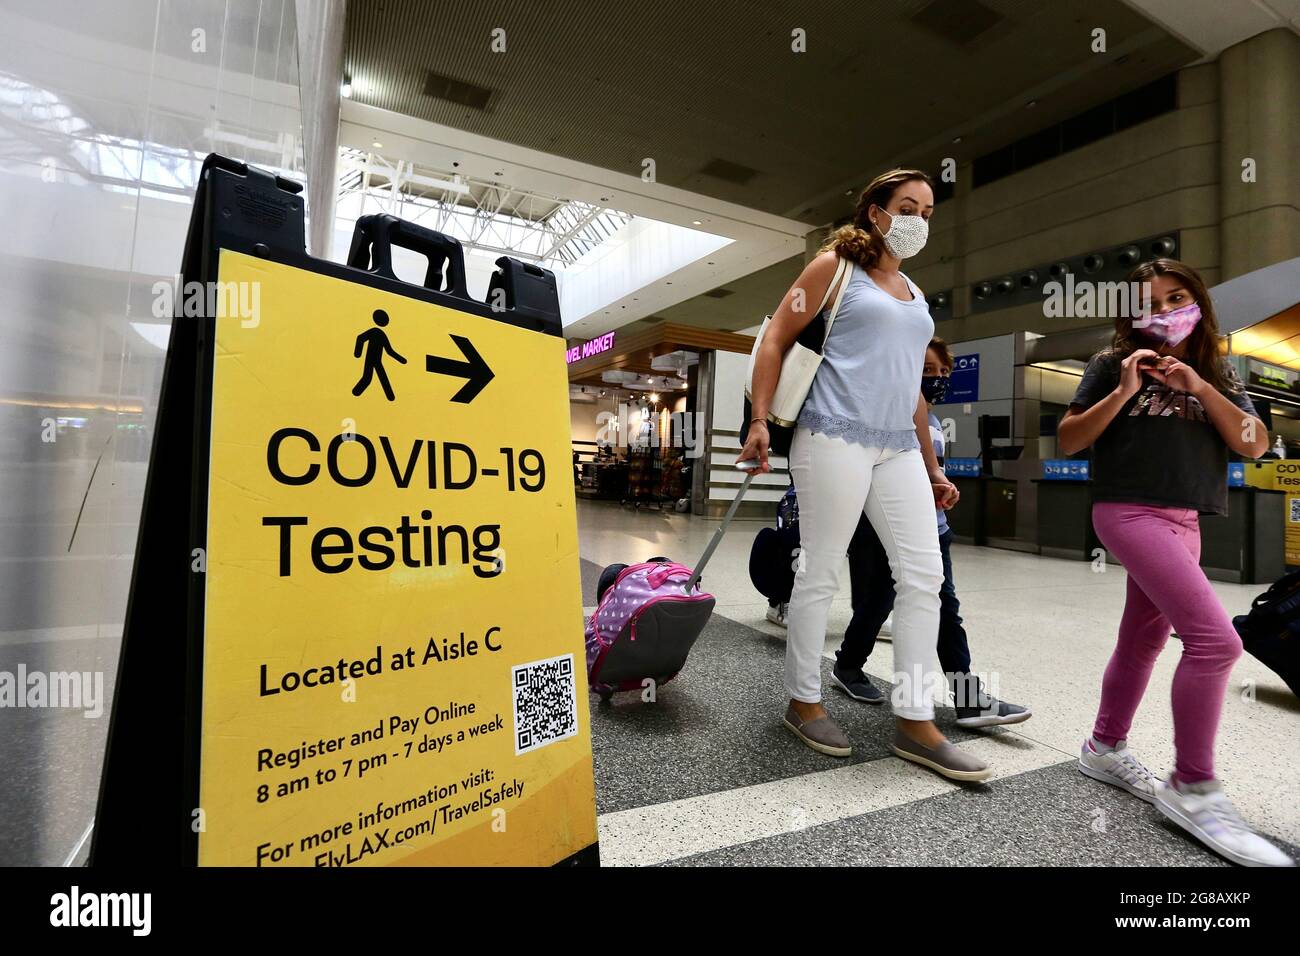 Los Angeles, USA. 19th July, 2021. Travelers with face masks are seen at the Los Angeles International Airport in Los Angeles, the United States, July 18, 2021. Public health authorities in Los Angeles County announced on Thursday that the most populous county in the United States will require all residents to wear masks in indoor public spaces, regardless of vaccination status, due to increased COVID-19 transmission. Credit: Xinhua/Alamy Live News Stock Photo